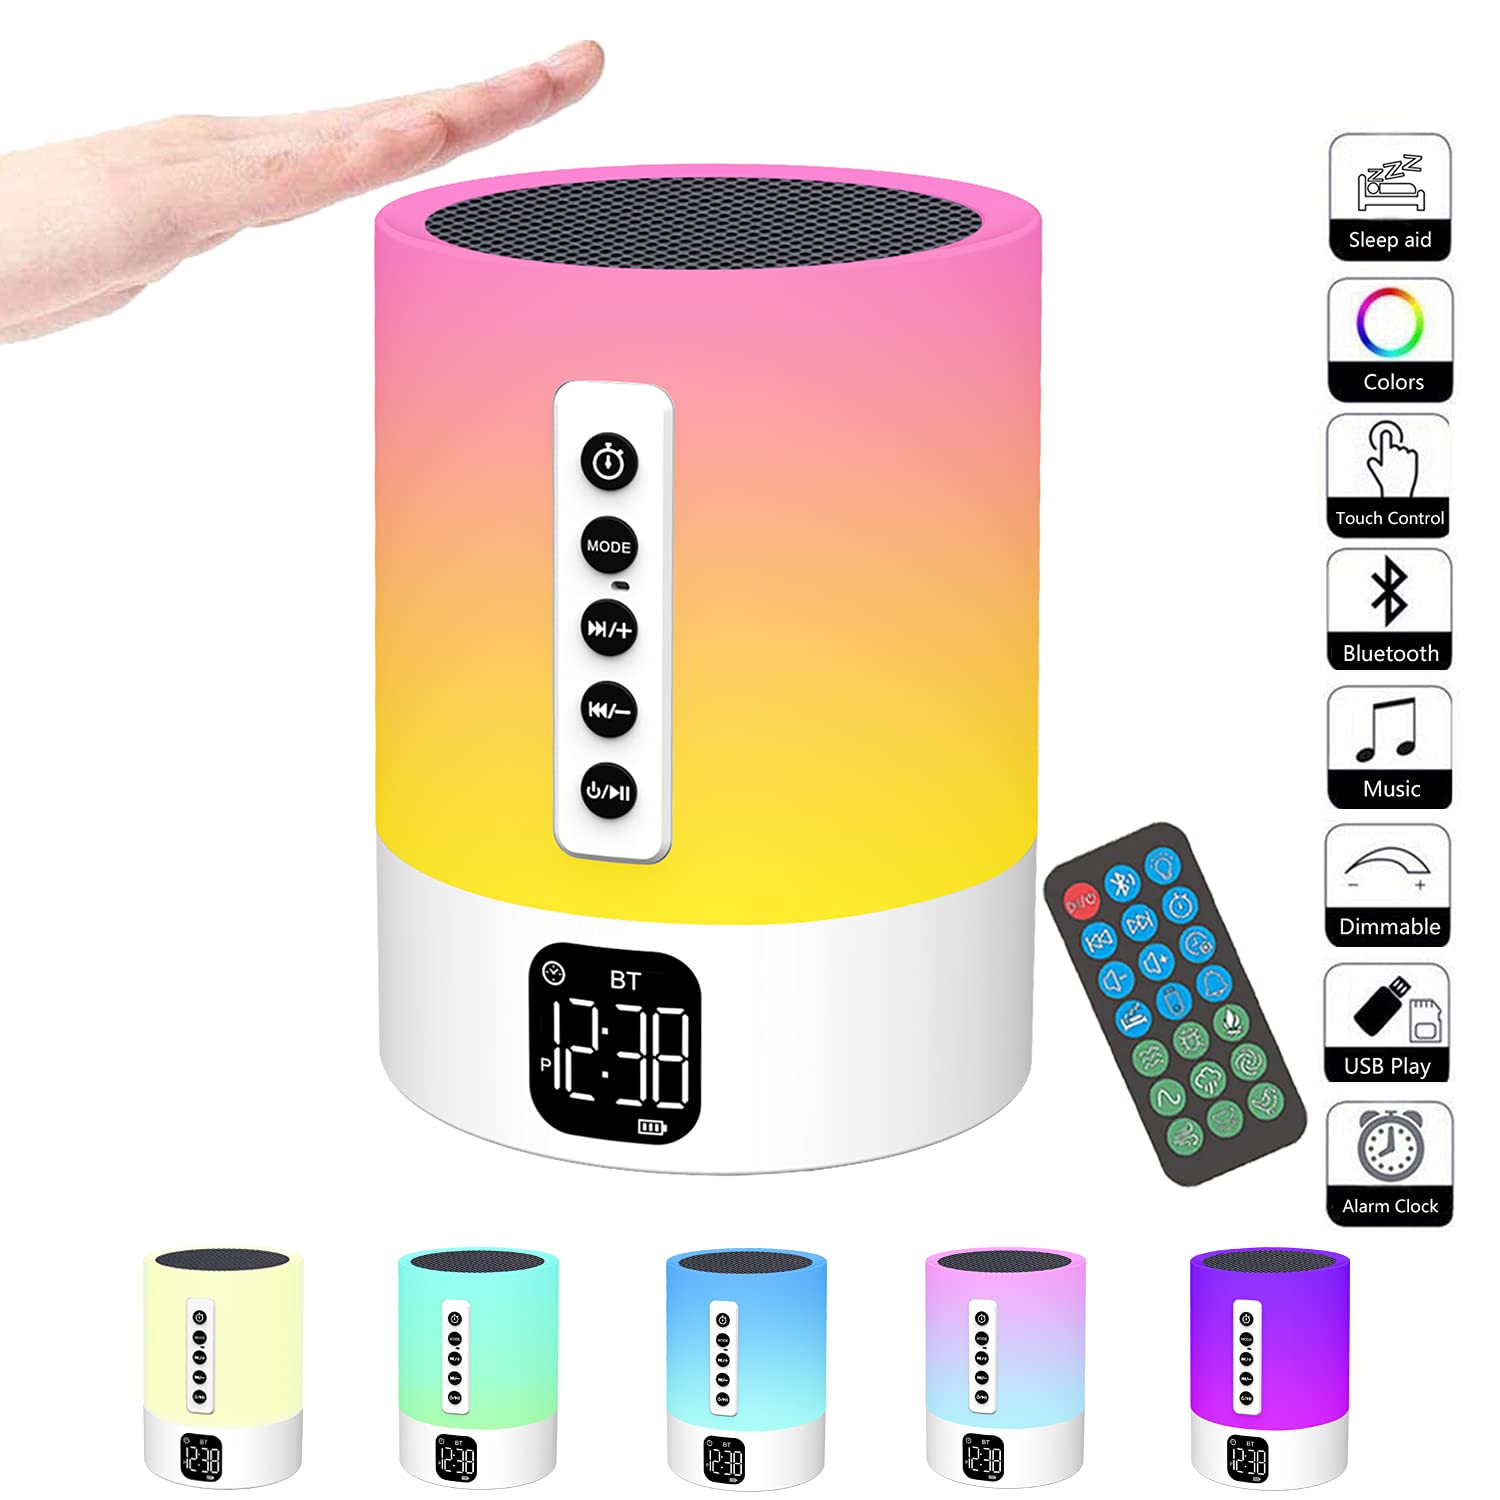 Night Light Bluetooth Speaker, Alarm Clock Bluetooth Speaker,Bedside Lamp with Alarm Clock,White Noise Machine,Dimmable Color Changing Table Lamp Bedroom Gifts for Teenage Girls Boys Kids Women Teens